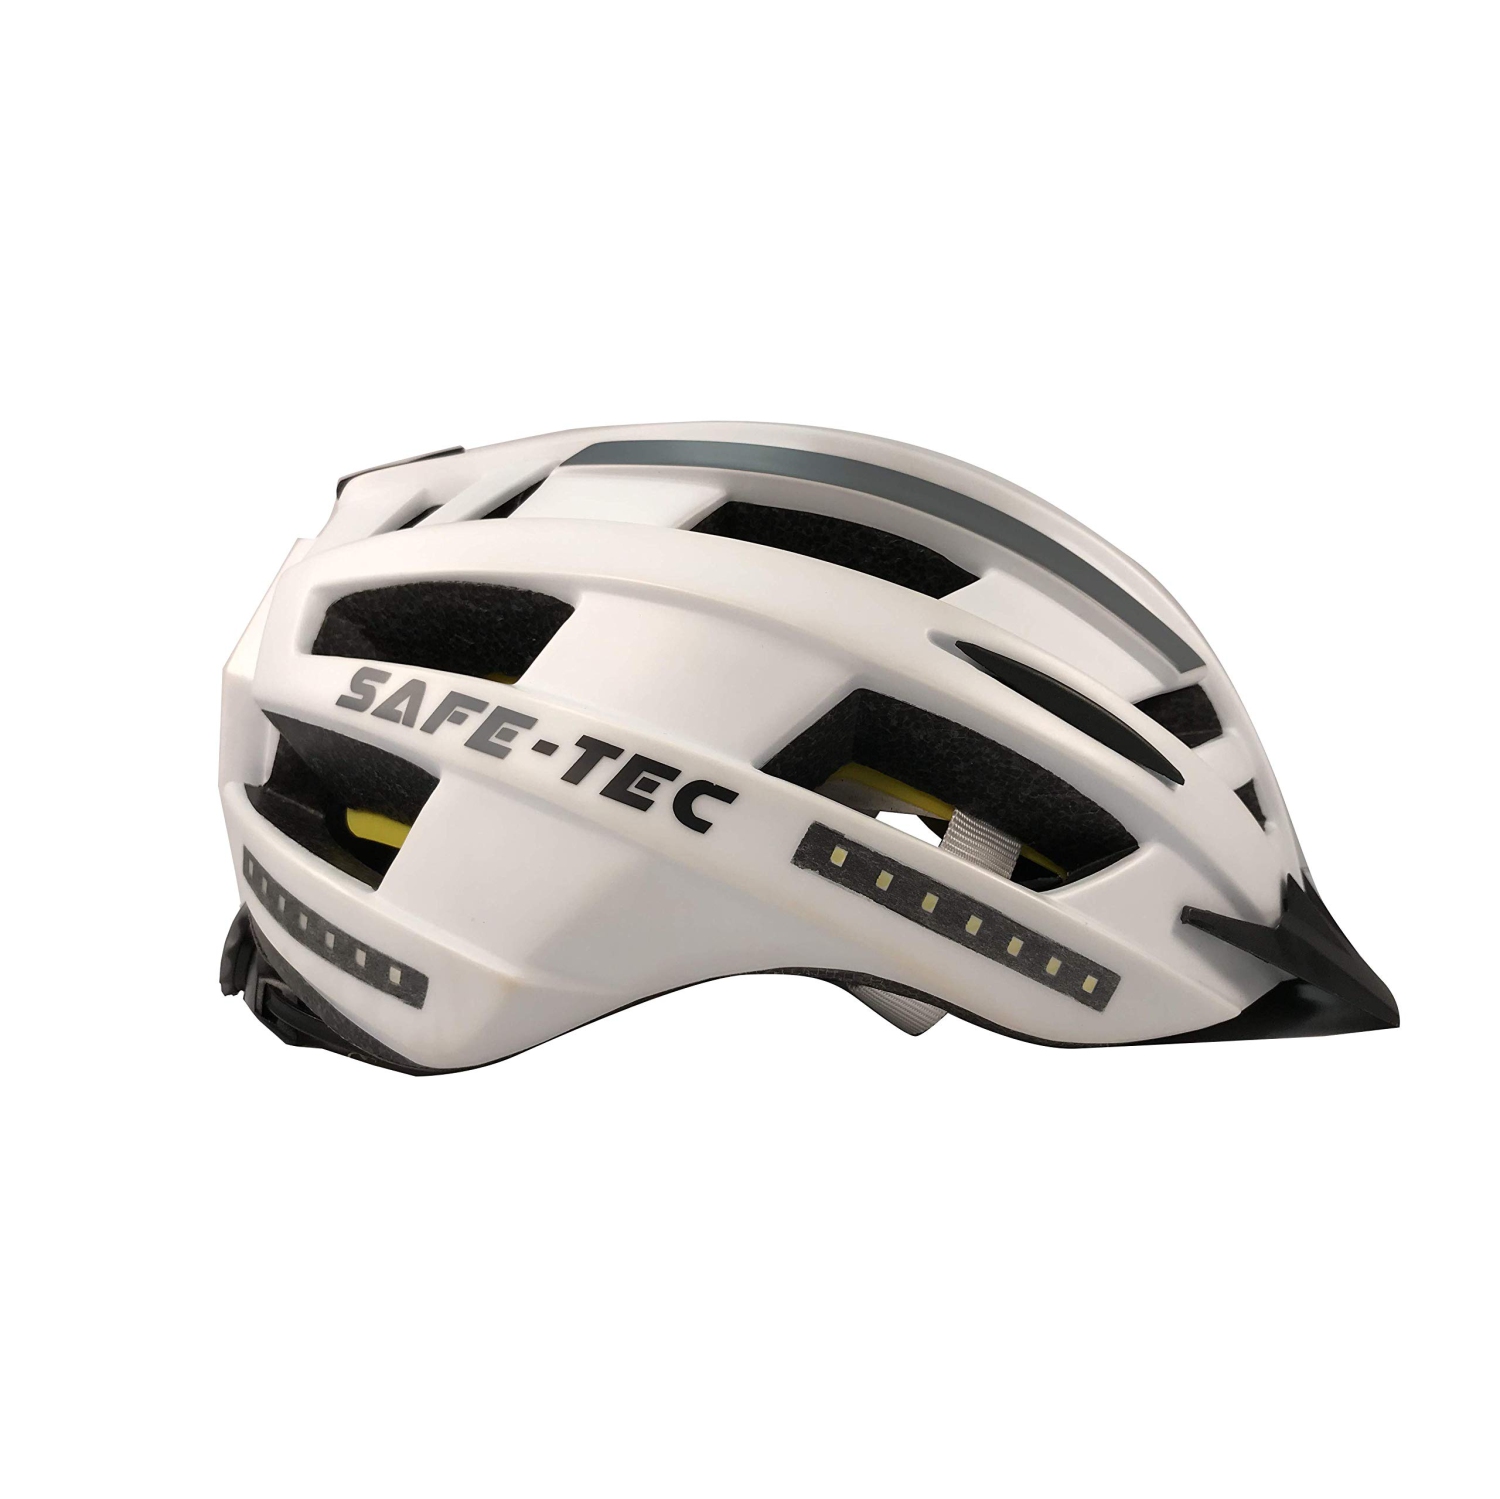 Safe-Tec Asgard Bicycle Smart Helmet with MIPS & Turn Signals and Bone Conduction Speakers (White Silver, Medium)